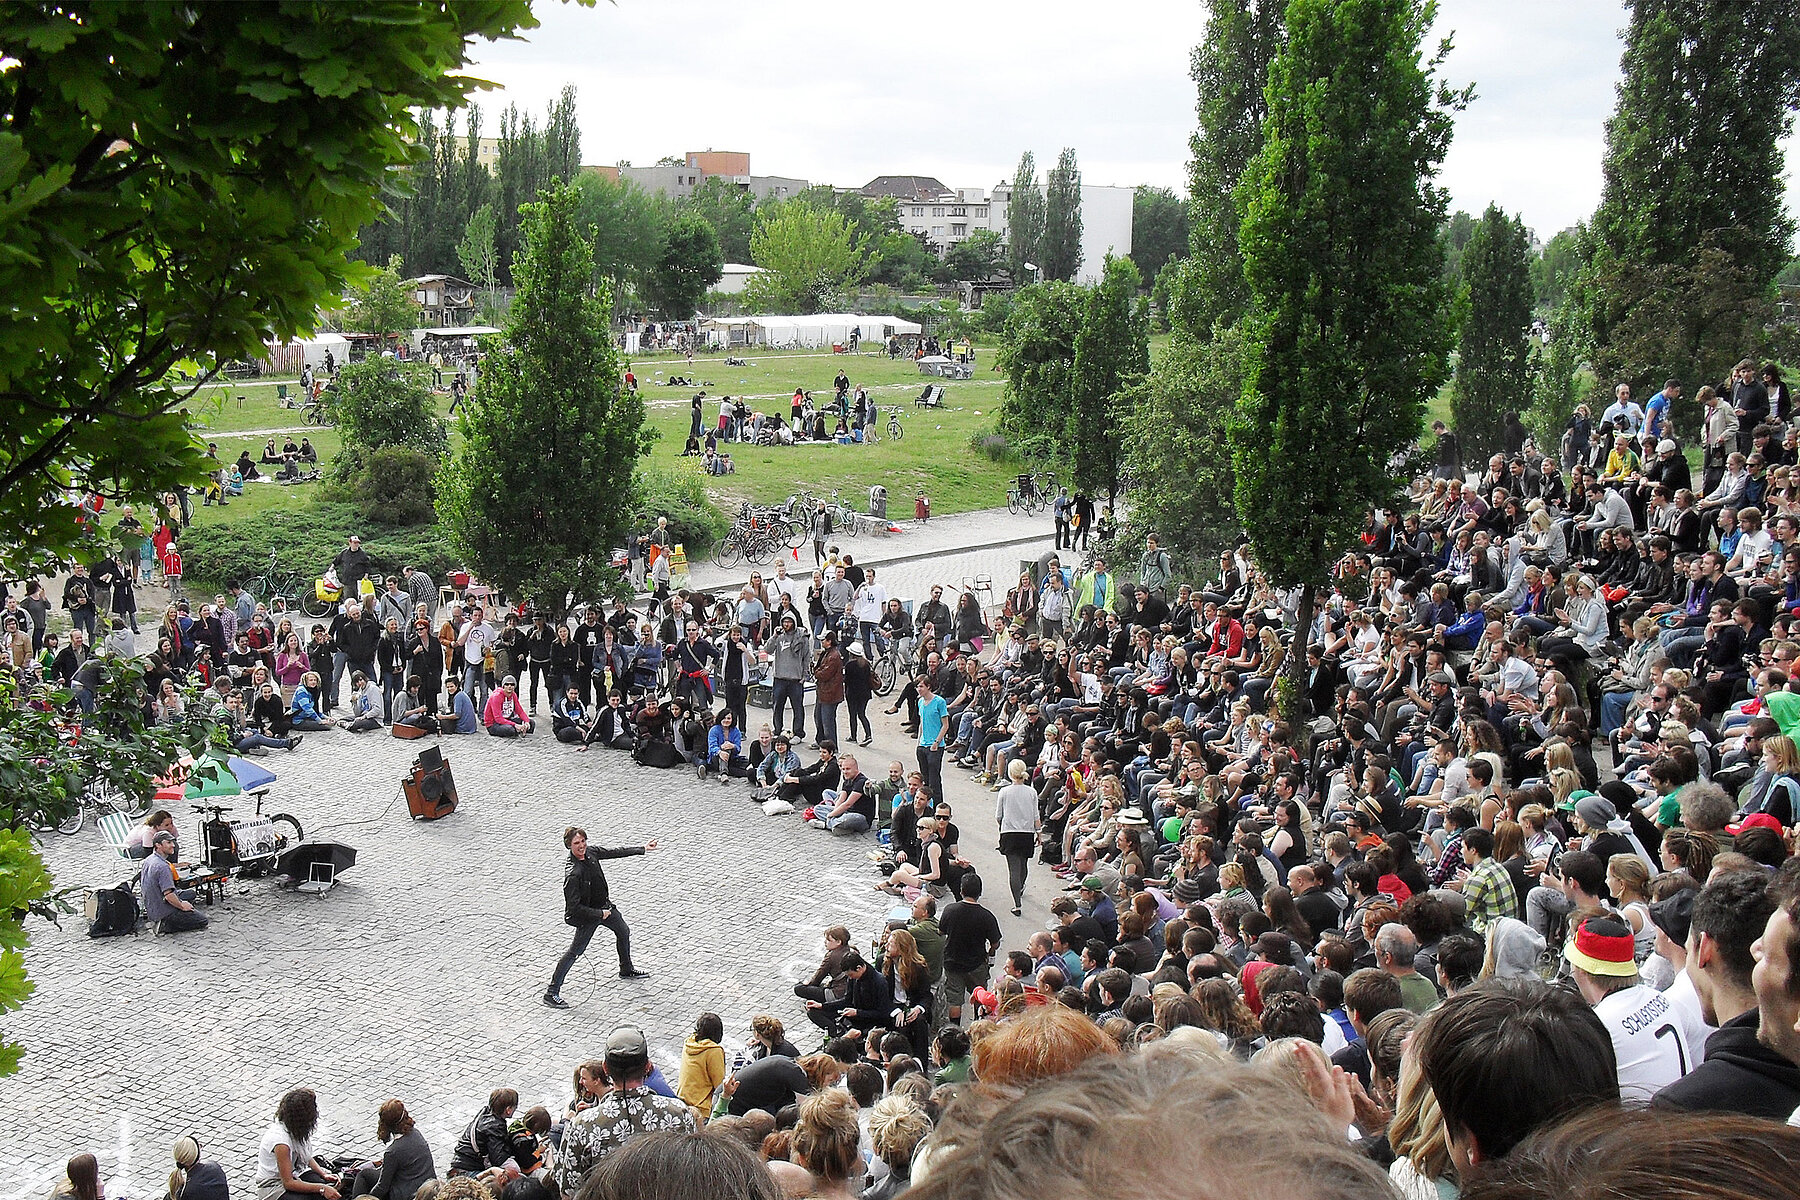 Many spectators in the amphitheatre of the Mauerpark watching a karaoke singer on the stage in the centre. 